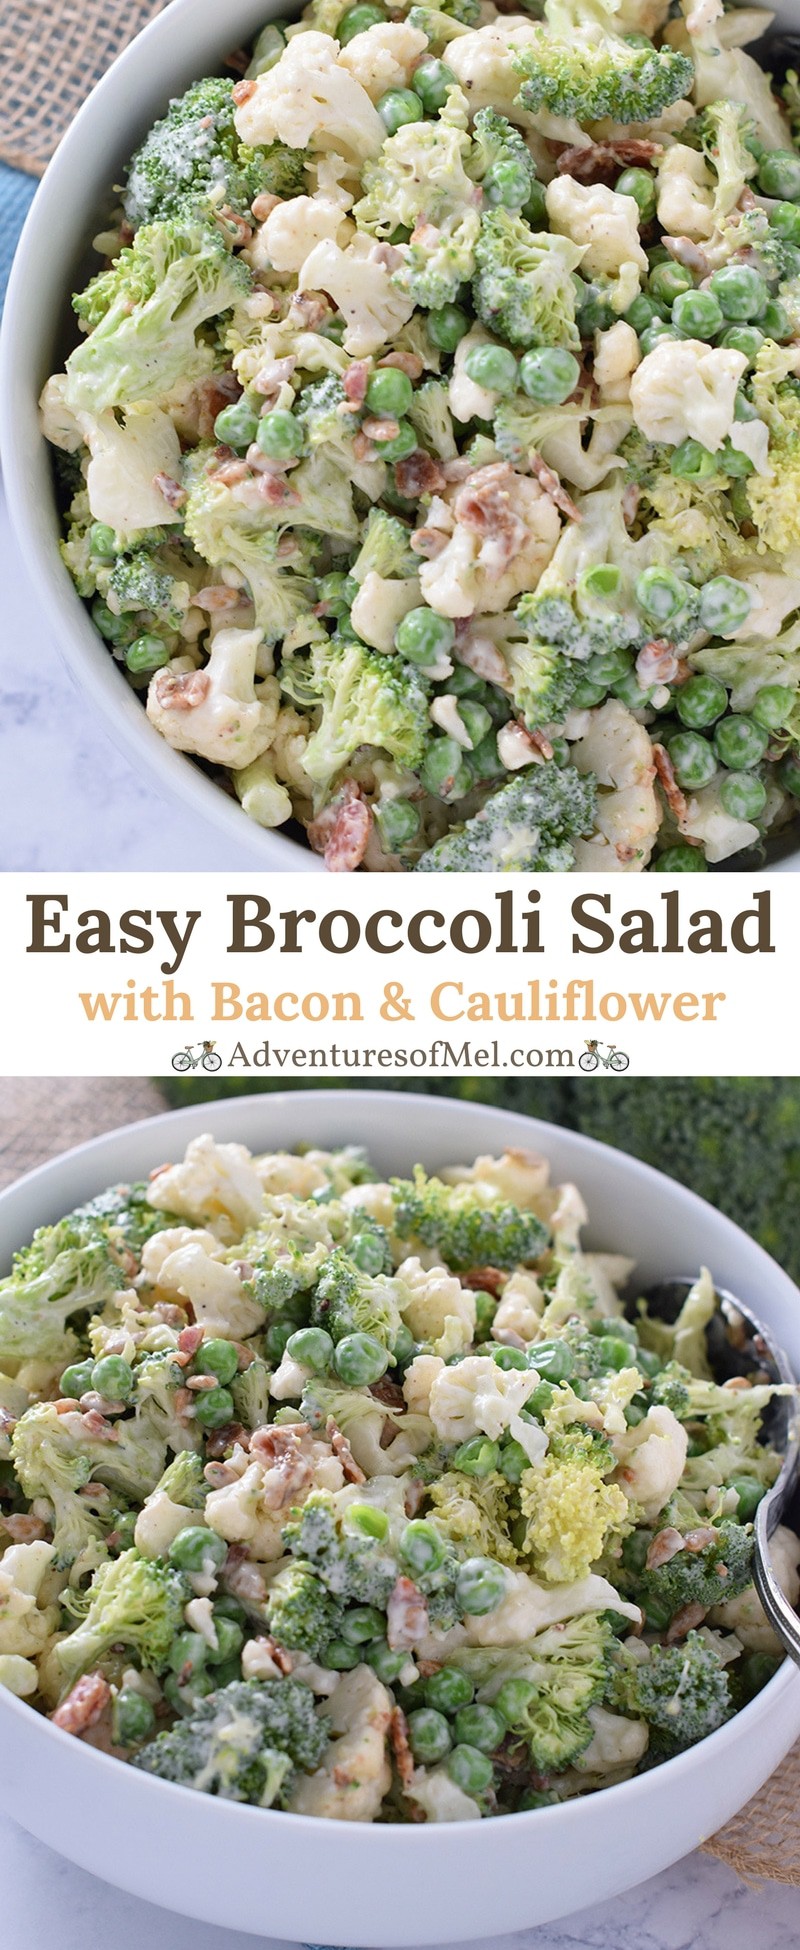 Easy Broccoli Salad, with bacon, cauliflower, sunflower seeds, and peas. A staple side dish and salad recipe perfect for every family gathering.